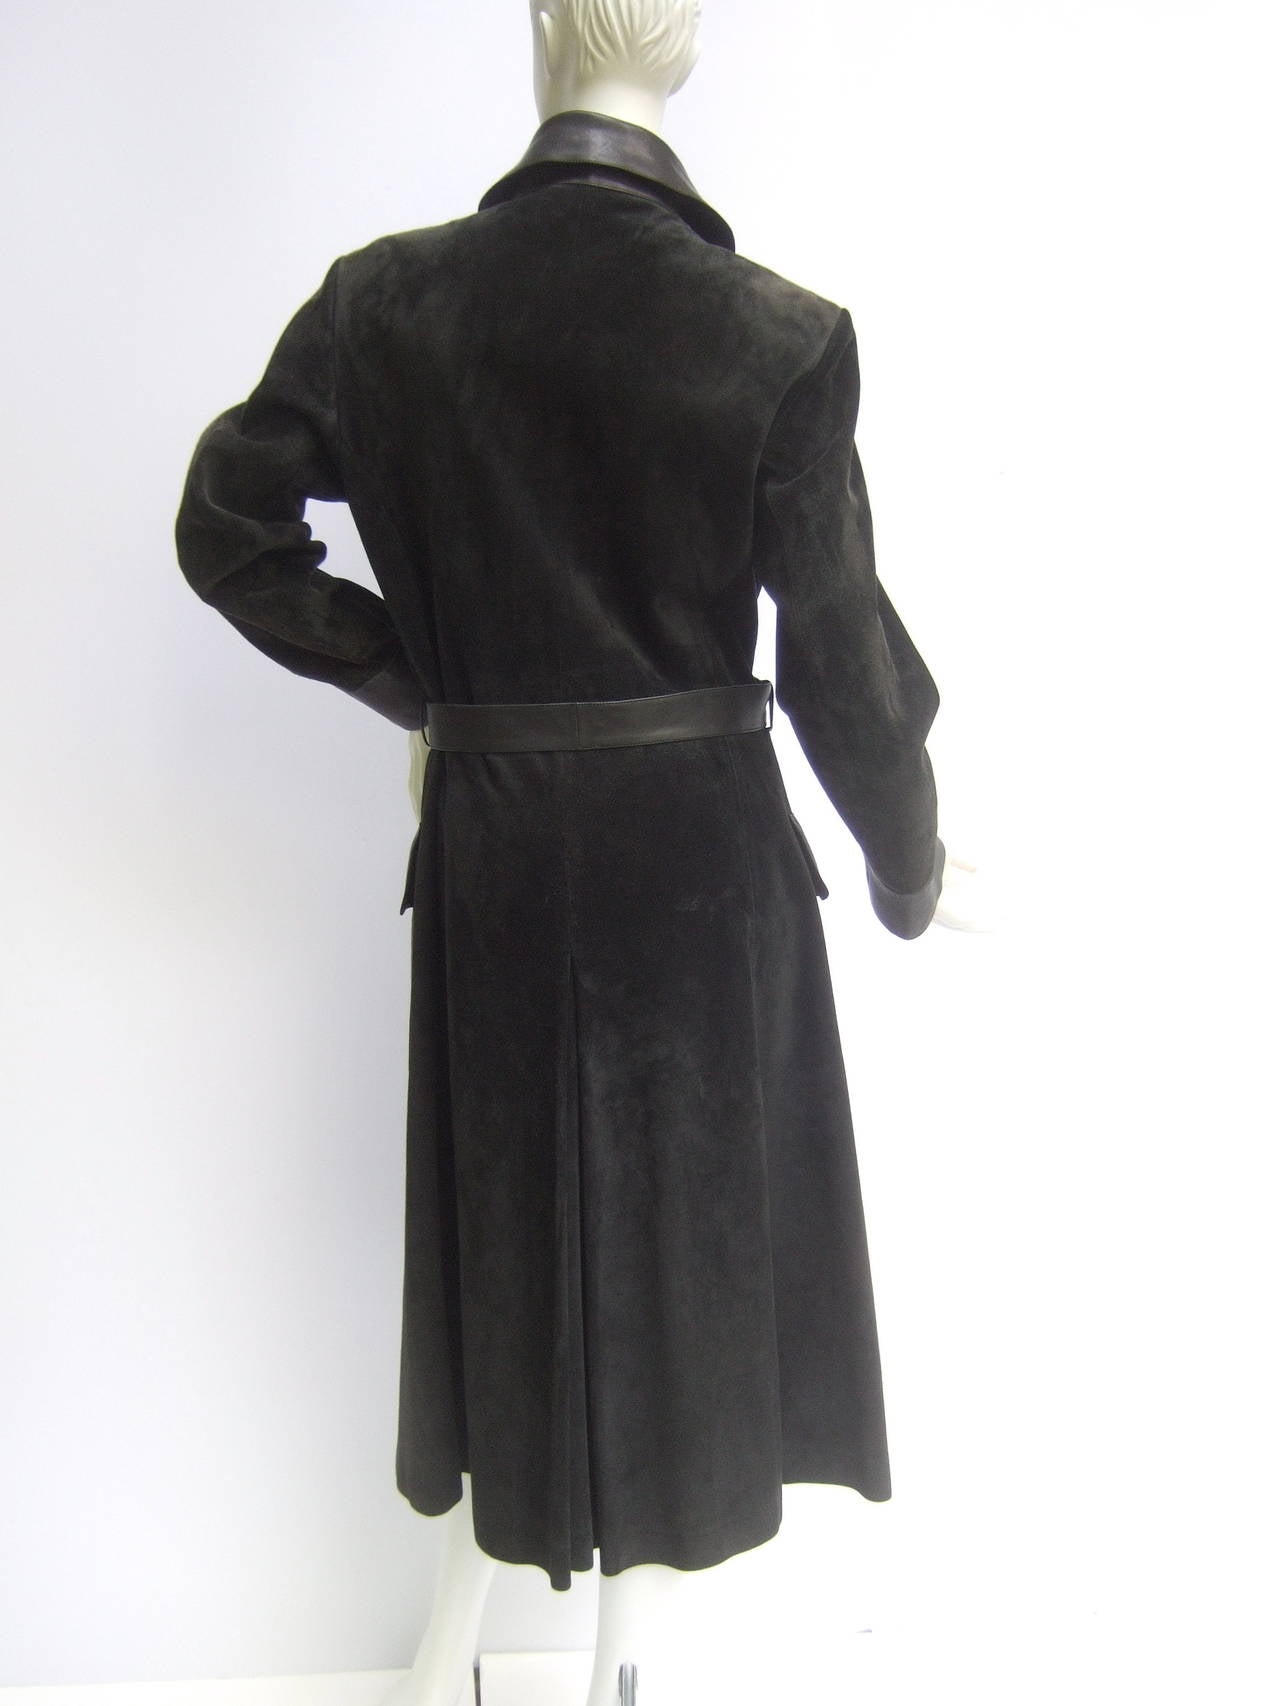 Gucci Sleek Black Doeskin Suede Trench Coat with Sterling Tiger Buttons c 1970 4